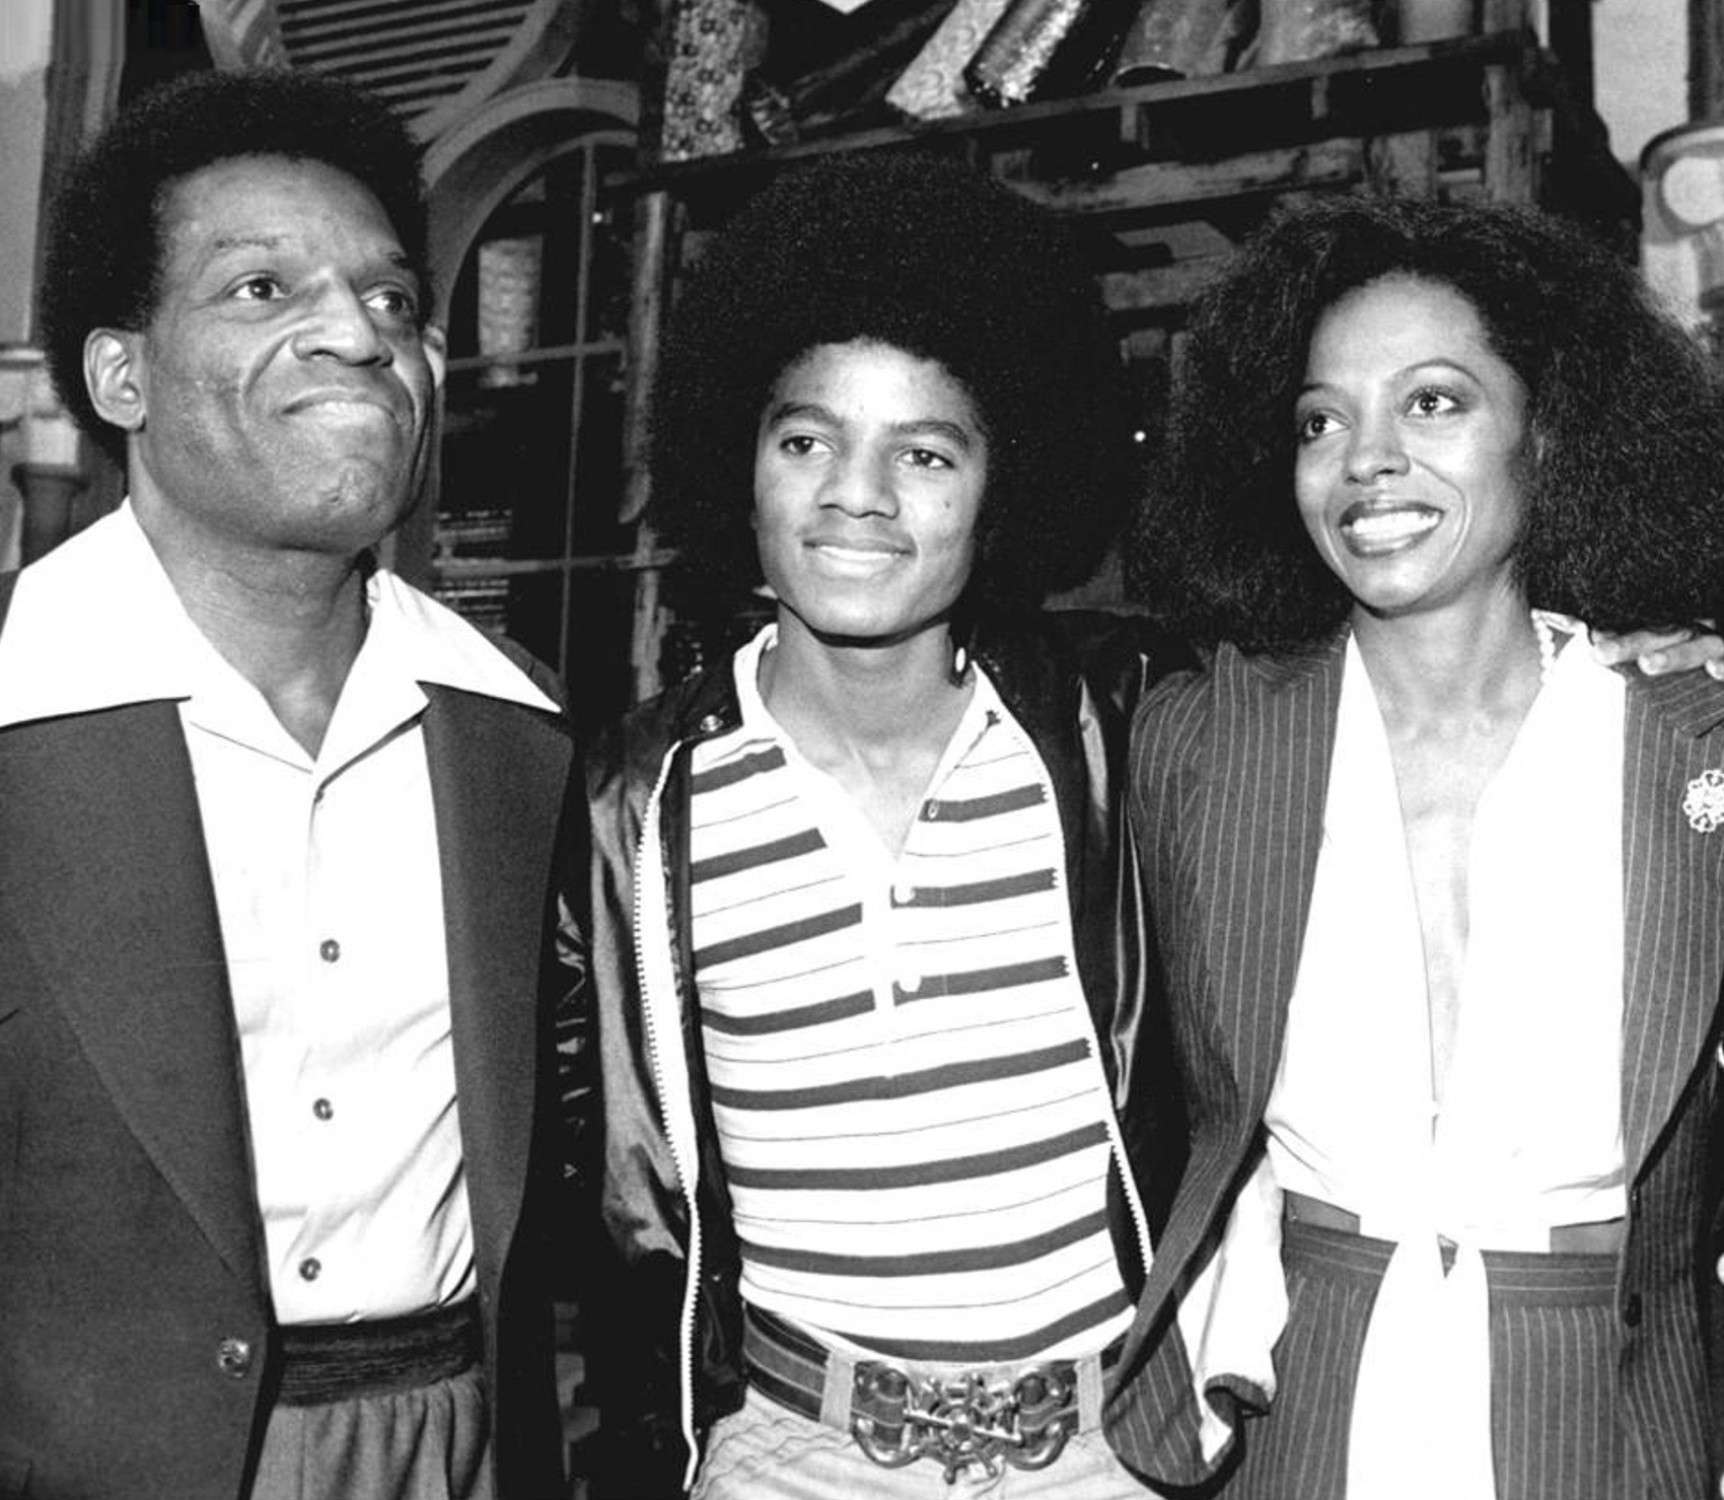 DIVULGAÇÃO - The Wiz - Michael Jackson and his The Wiz, Co-Also starring Diana Ross and Russell Nipsy attend a Press Conference for the premiere of the film. Imagem46